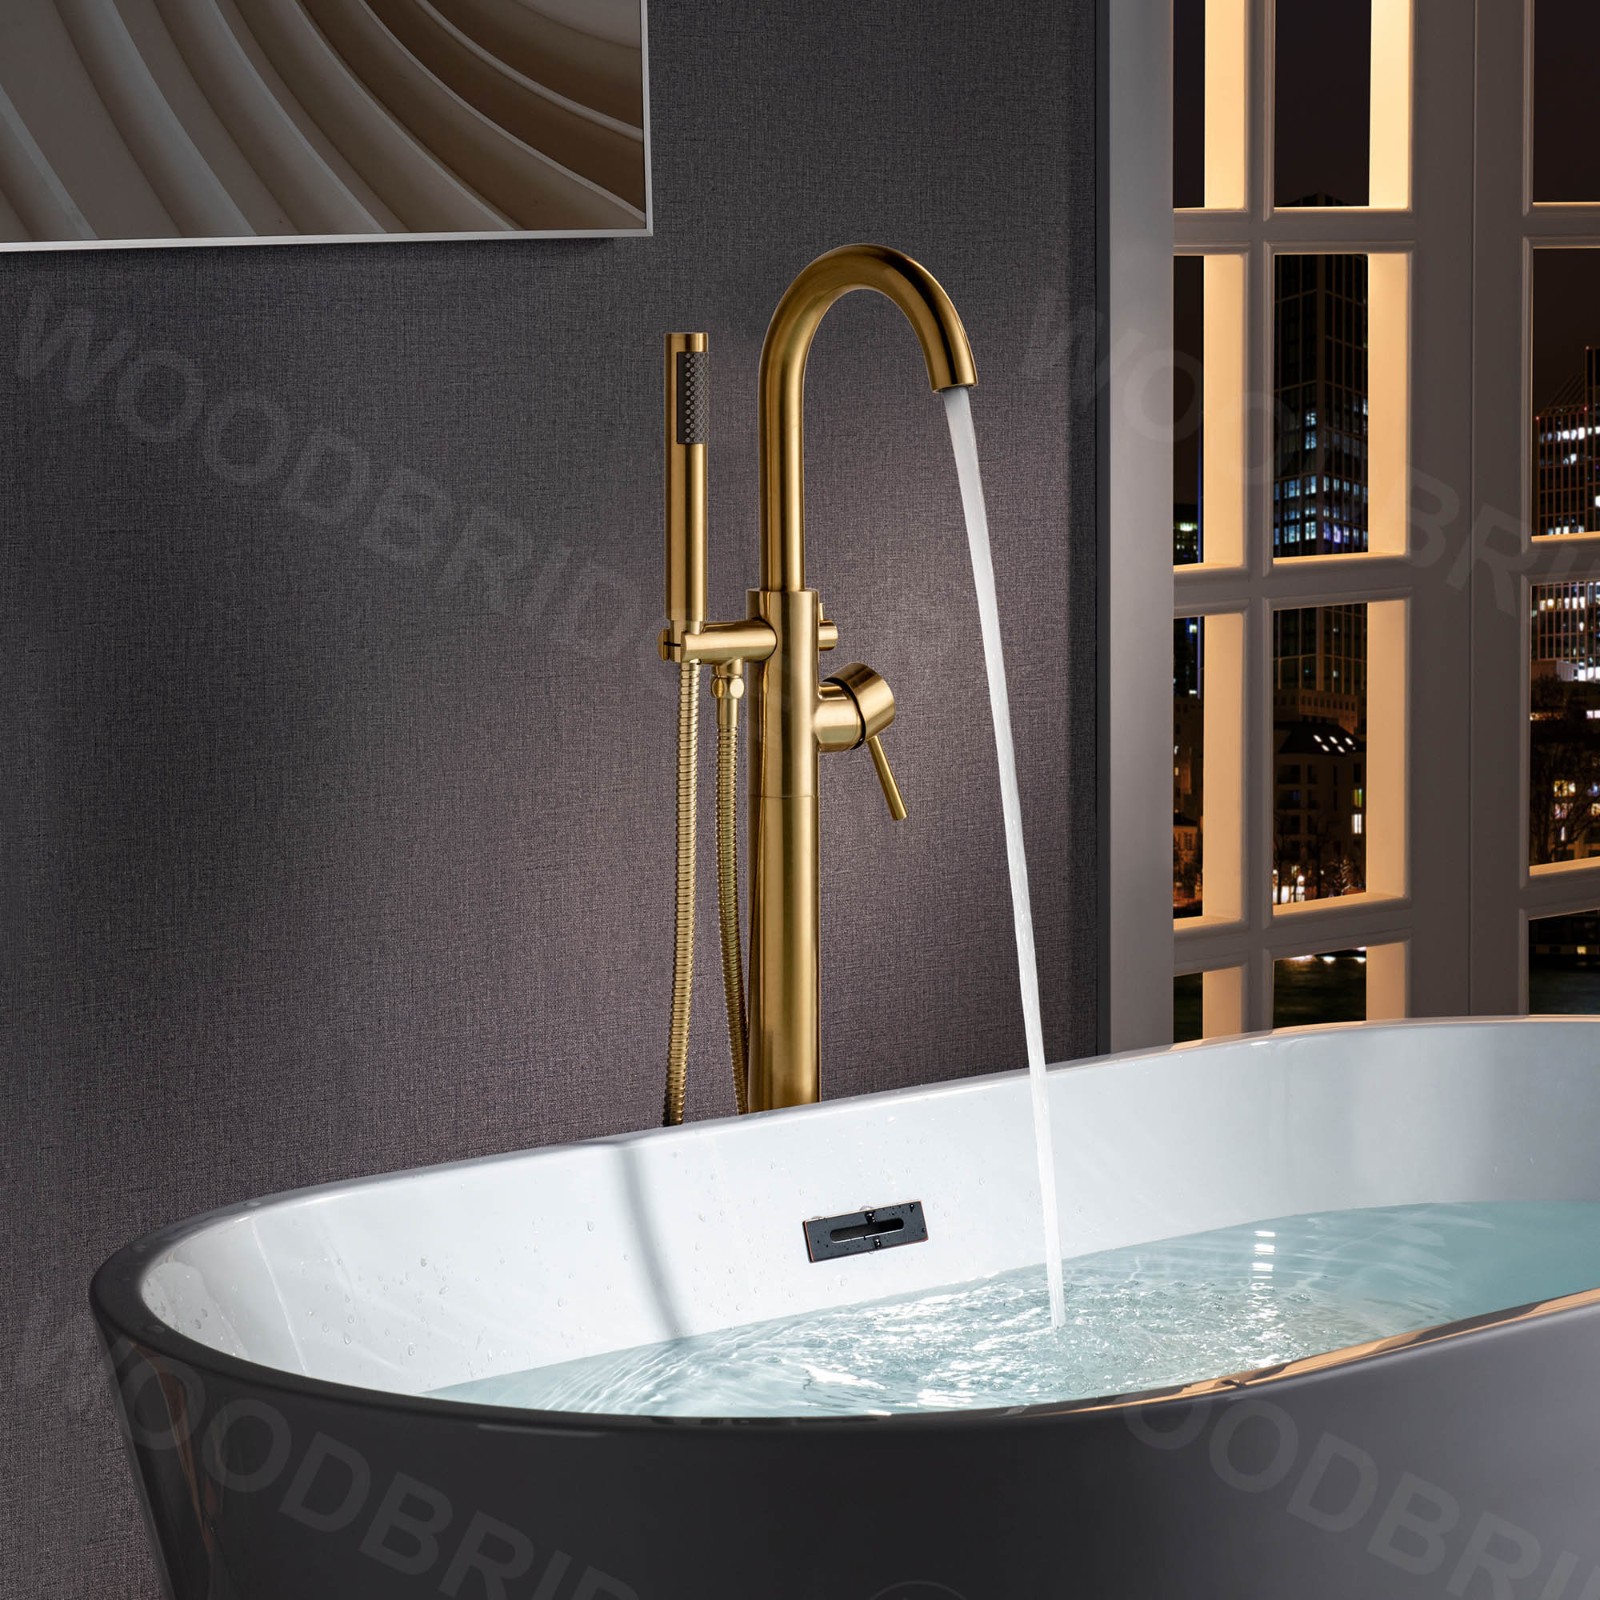  WOODBRIDGE F0026BGRD Contemporary Single Handle Floor Mount Freestanding Tub Filler Faucet with Cylinder Shape Hand shower in Brushed Gold Finish._4194